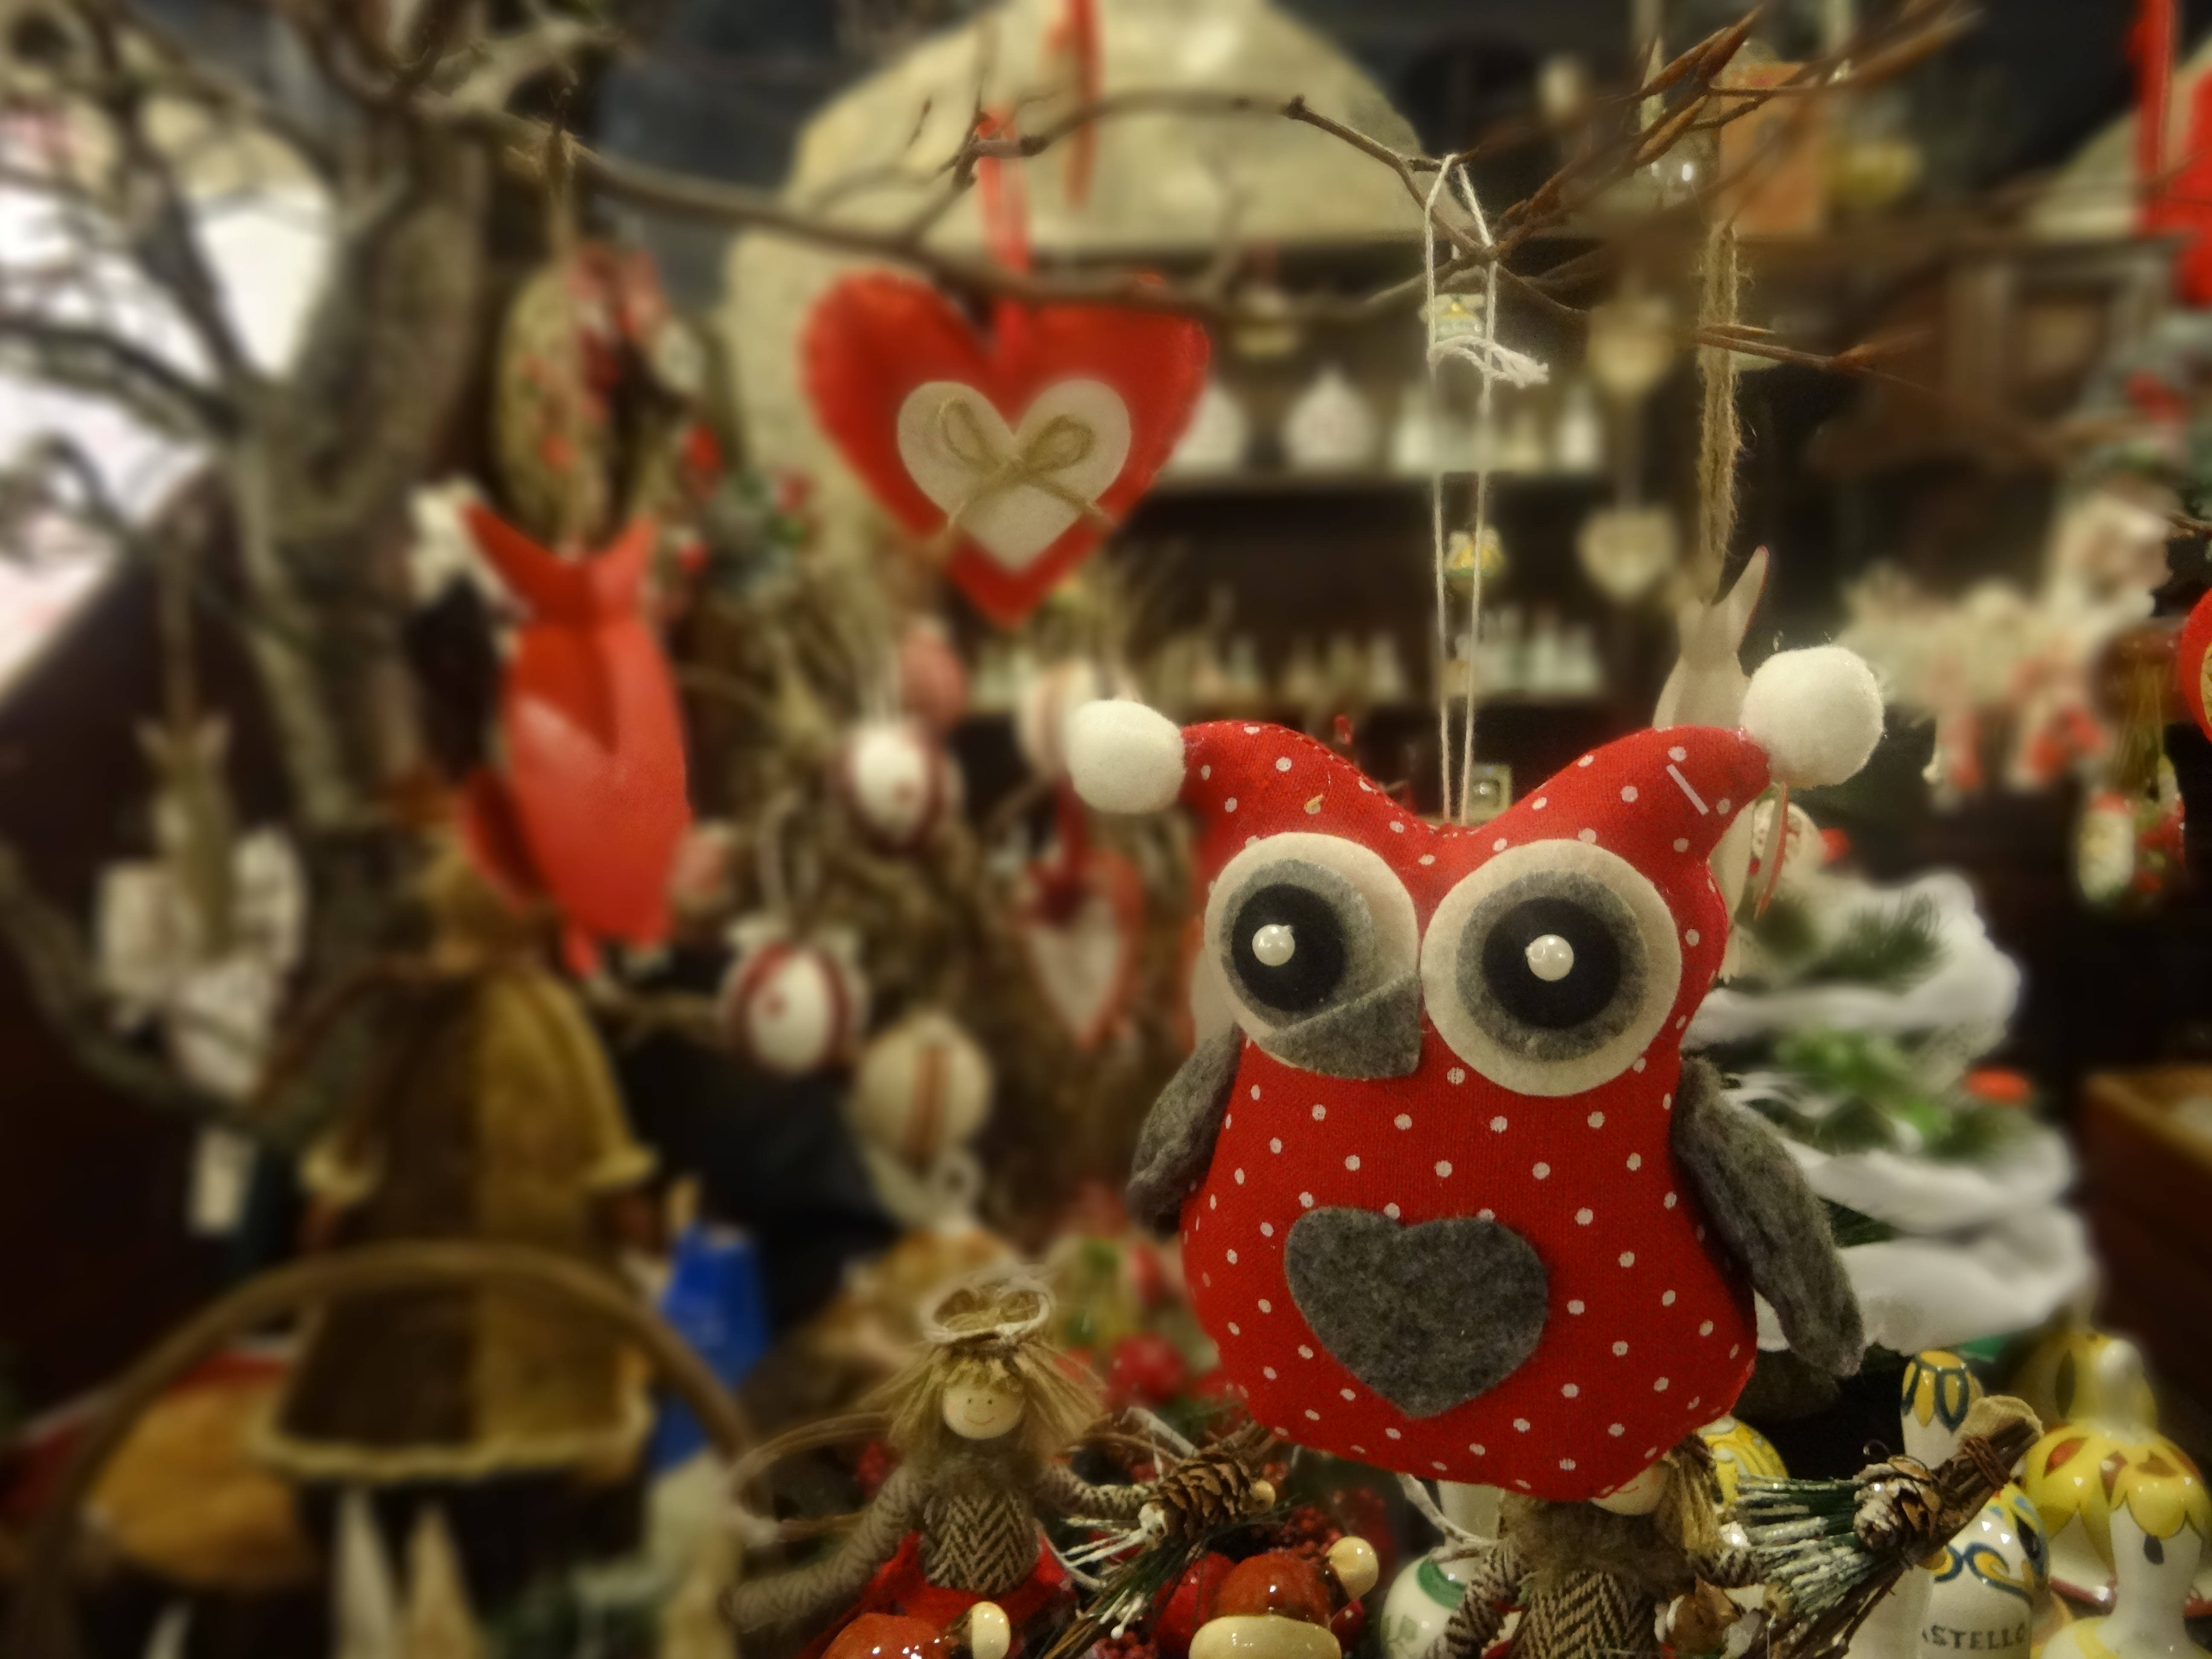 Christmas village - Christmas decoration in the shape of an owl